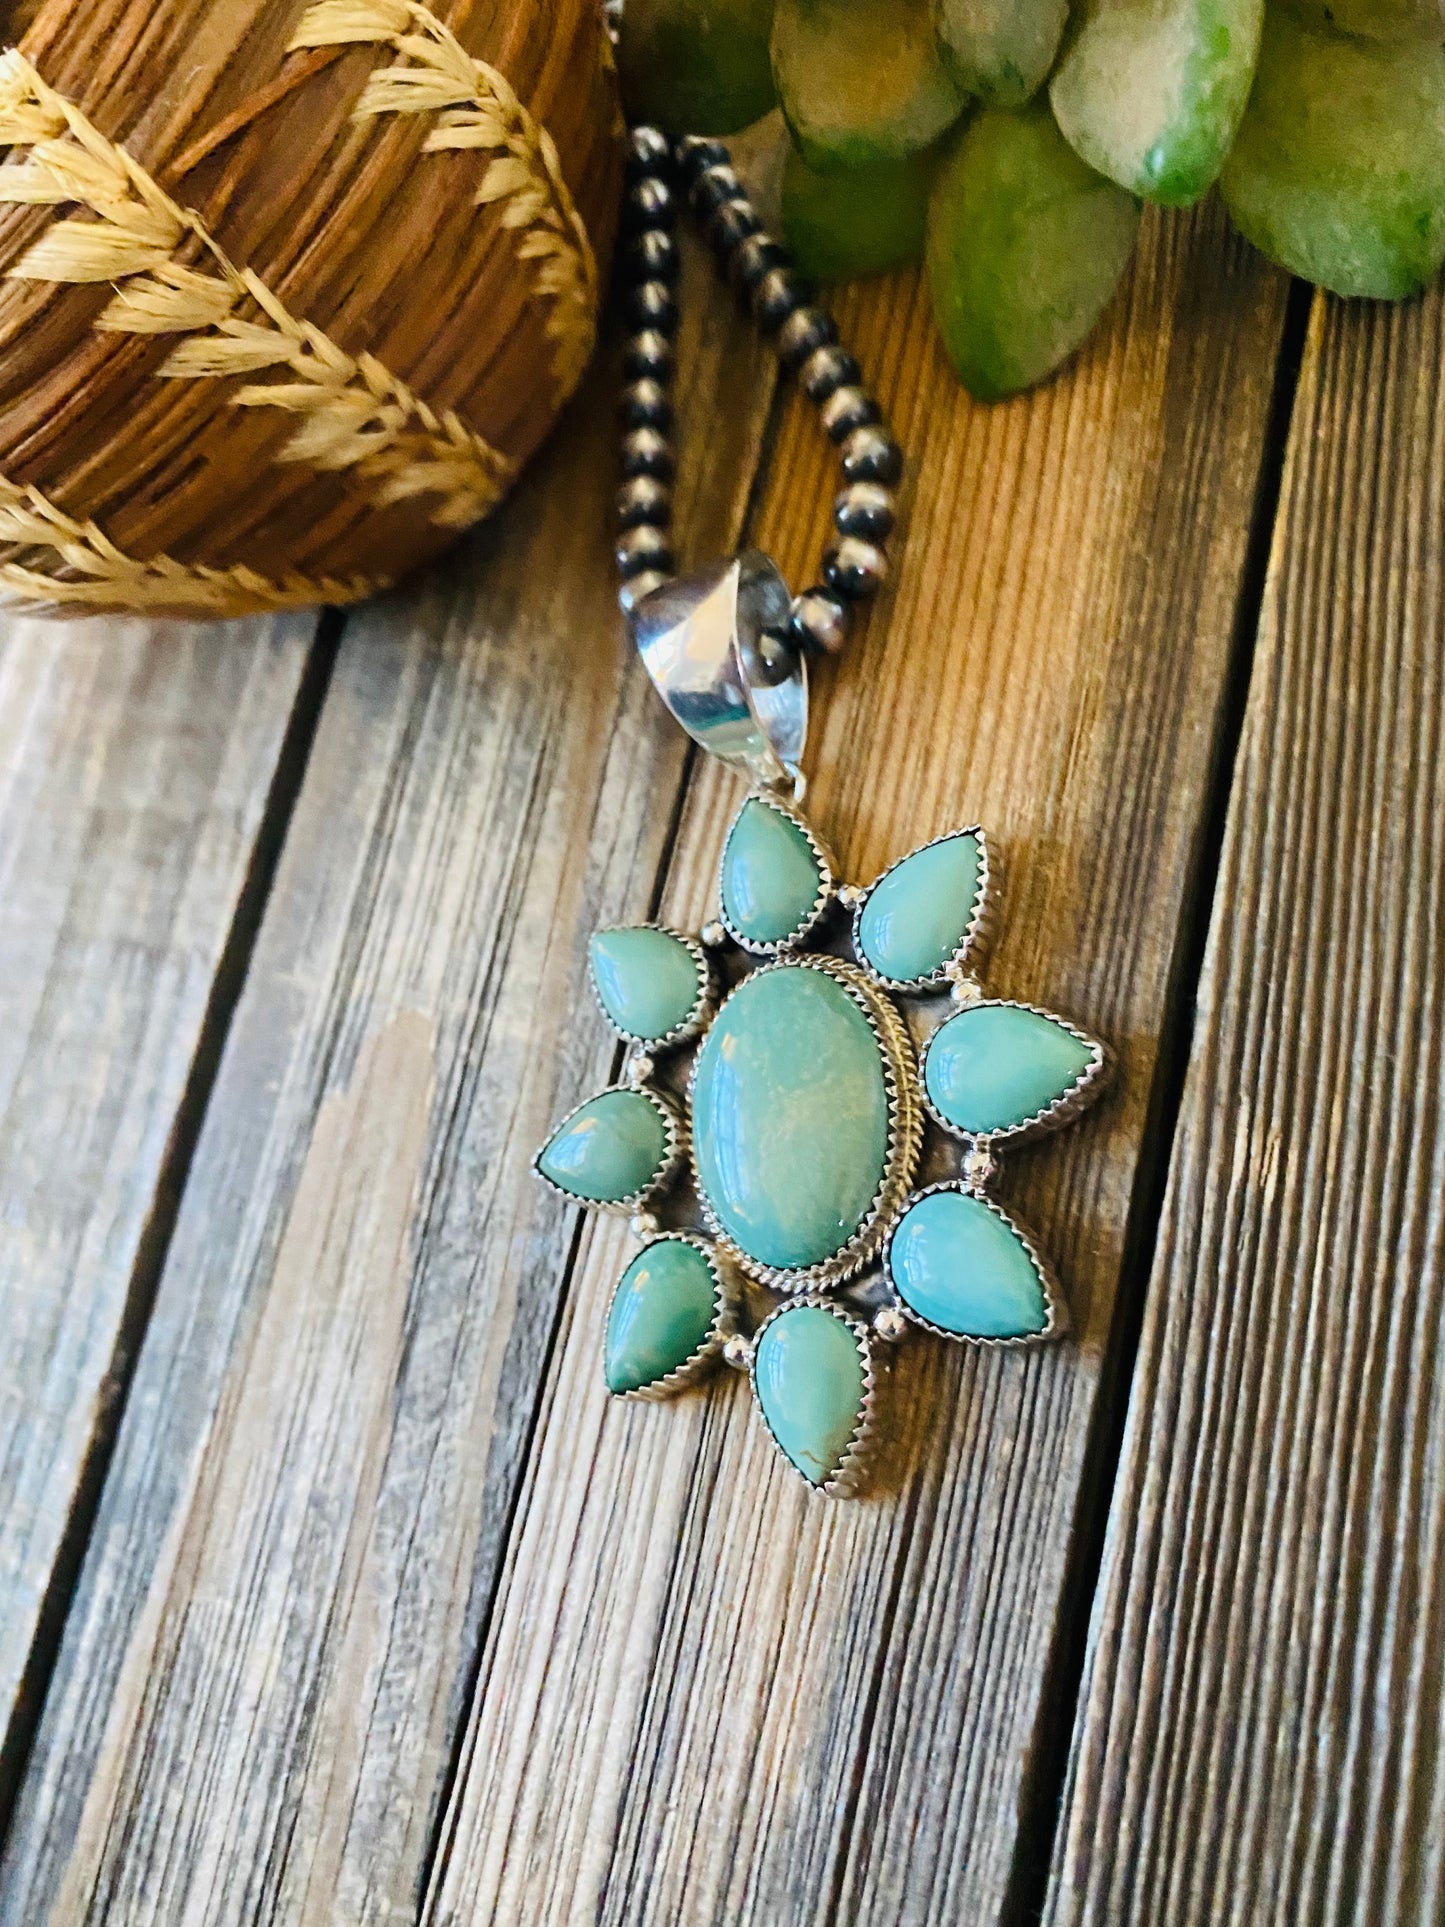 Navajo Sterling Silver & Kingman Turquoise Cluster Pendant Signed